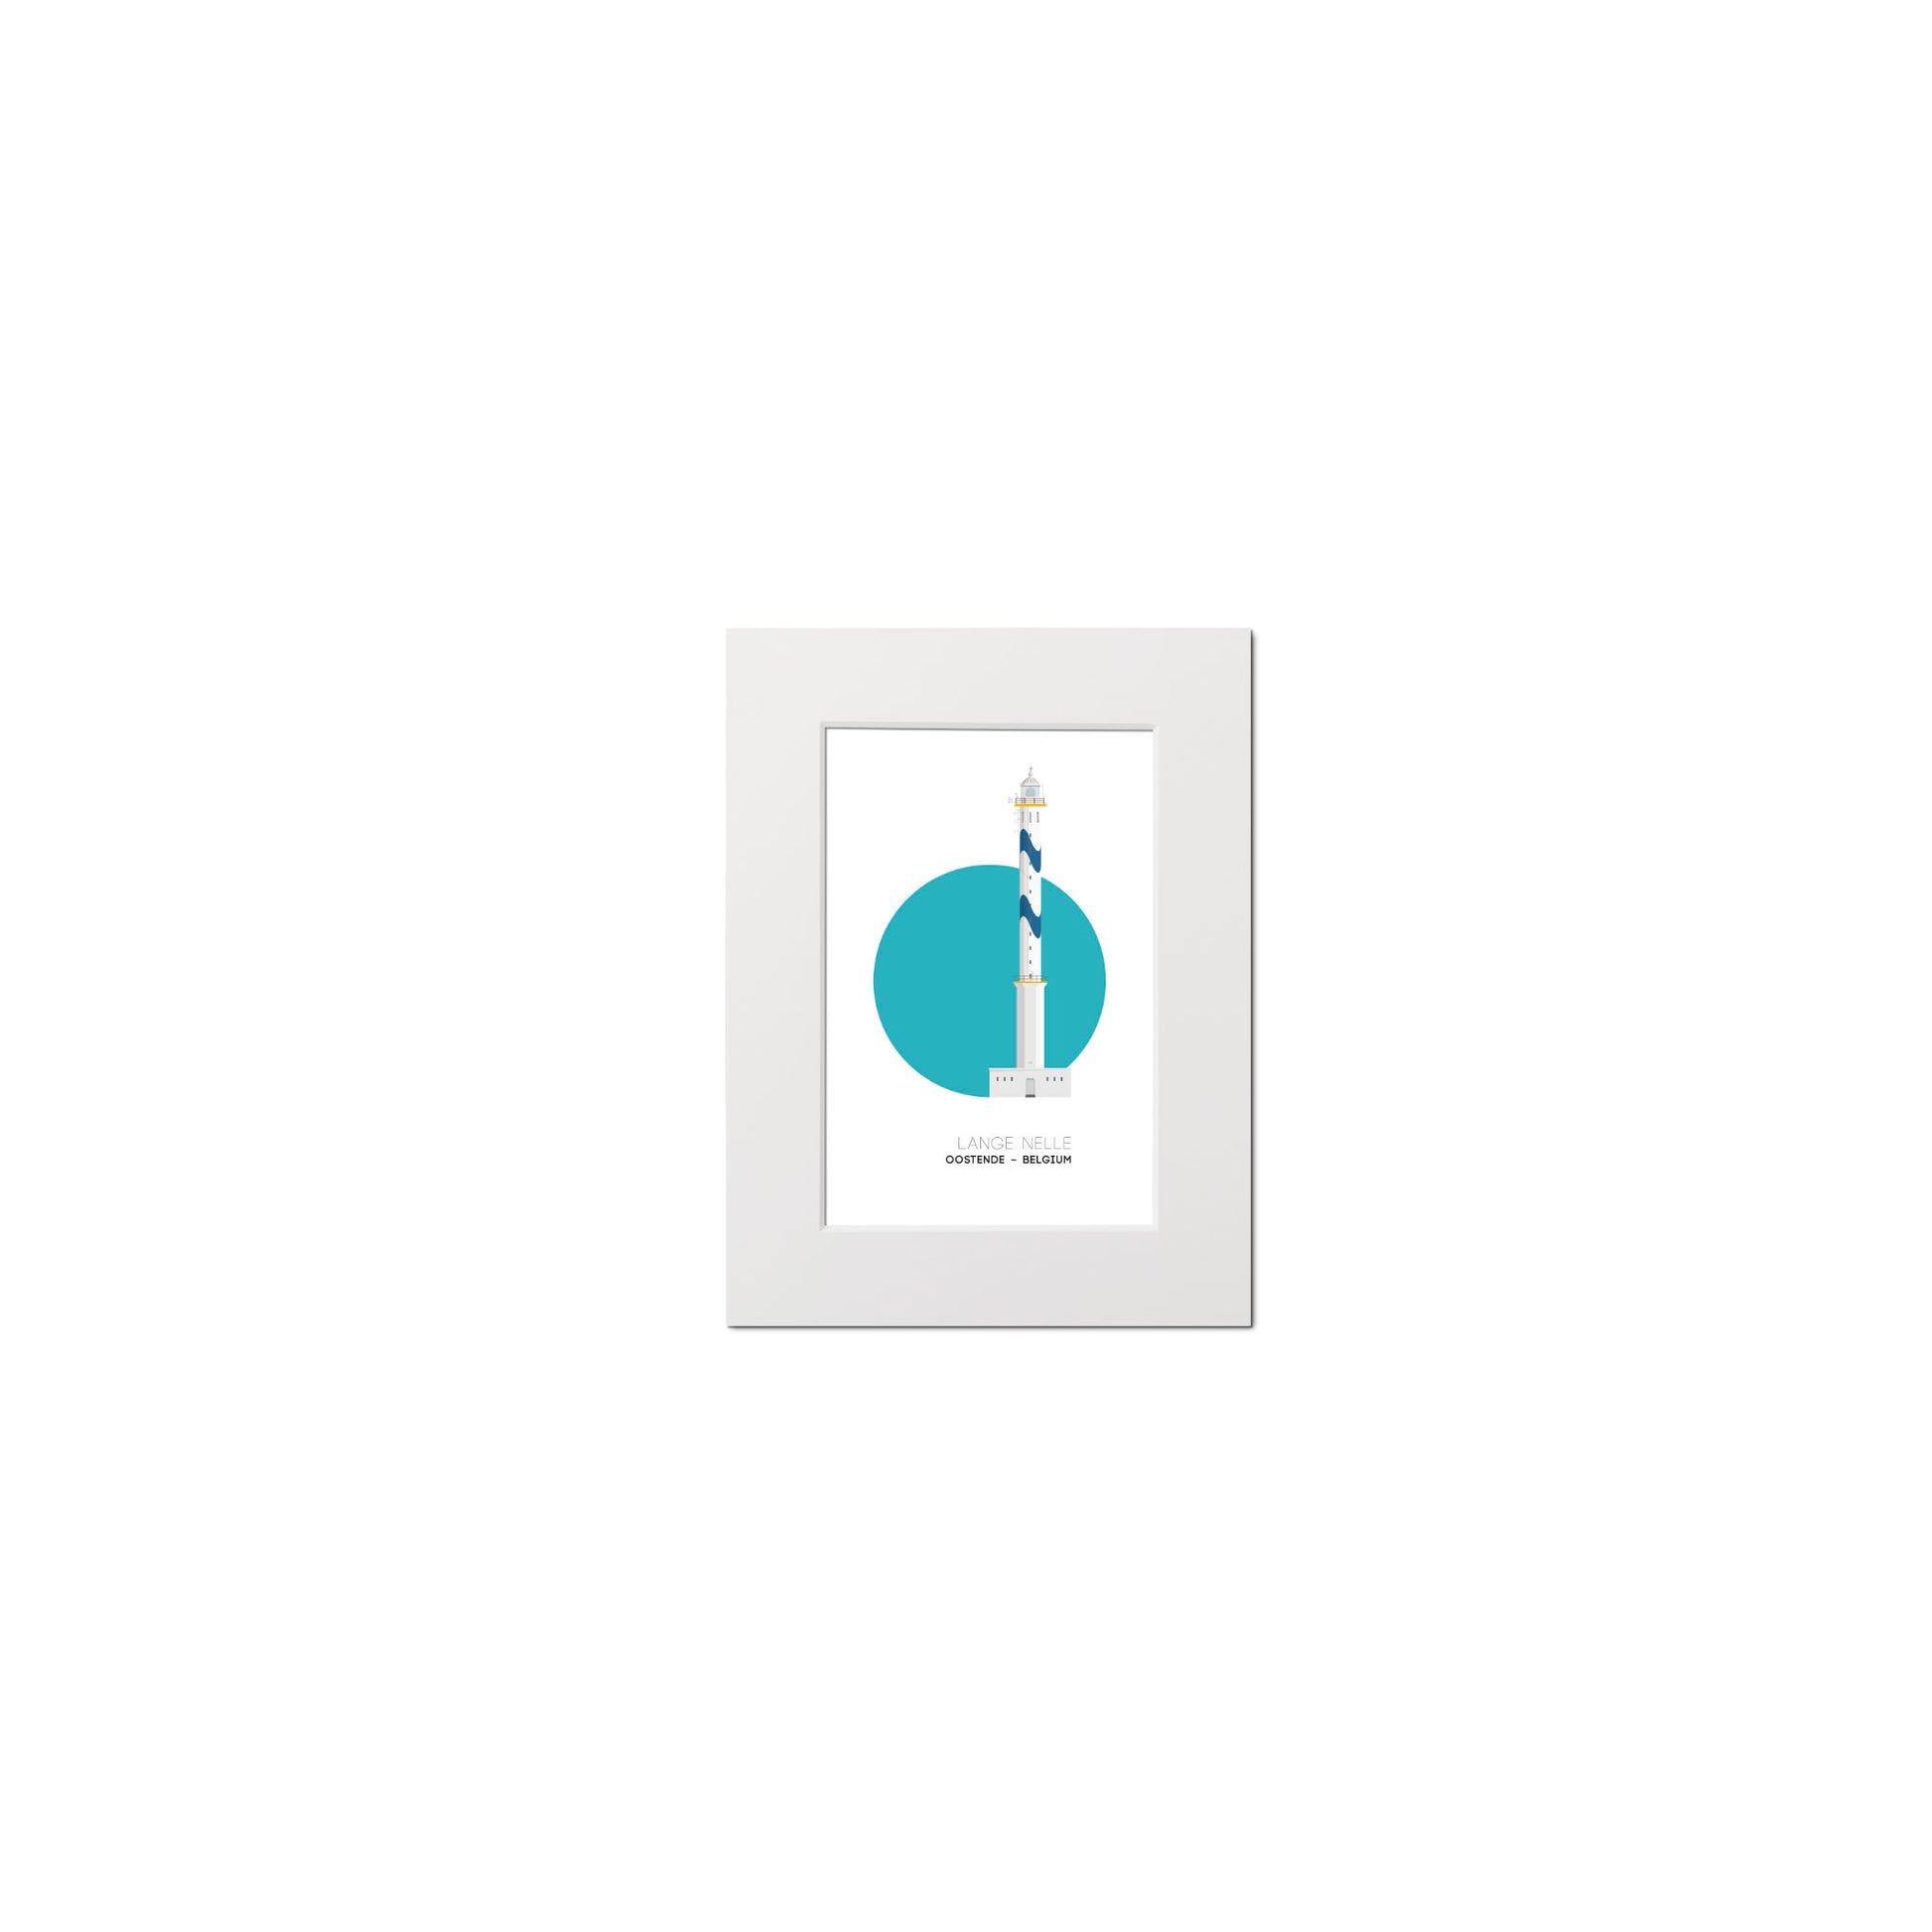 Illustration of the Lange Nelle lighthouse in Oostend, Belgium, with blue waves pattern painted onto it. On a white background with aqua blue circle as a backdrop, mounted and measuring 15x20cm.